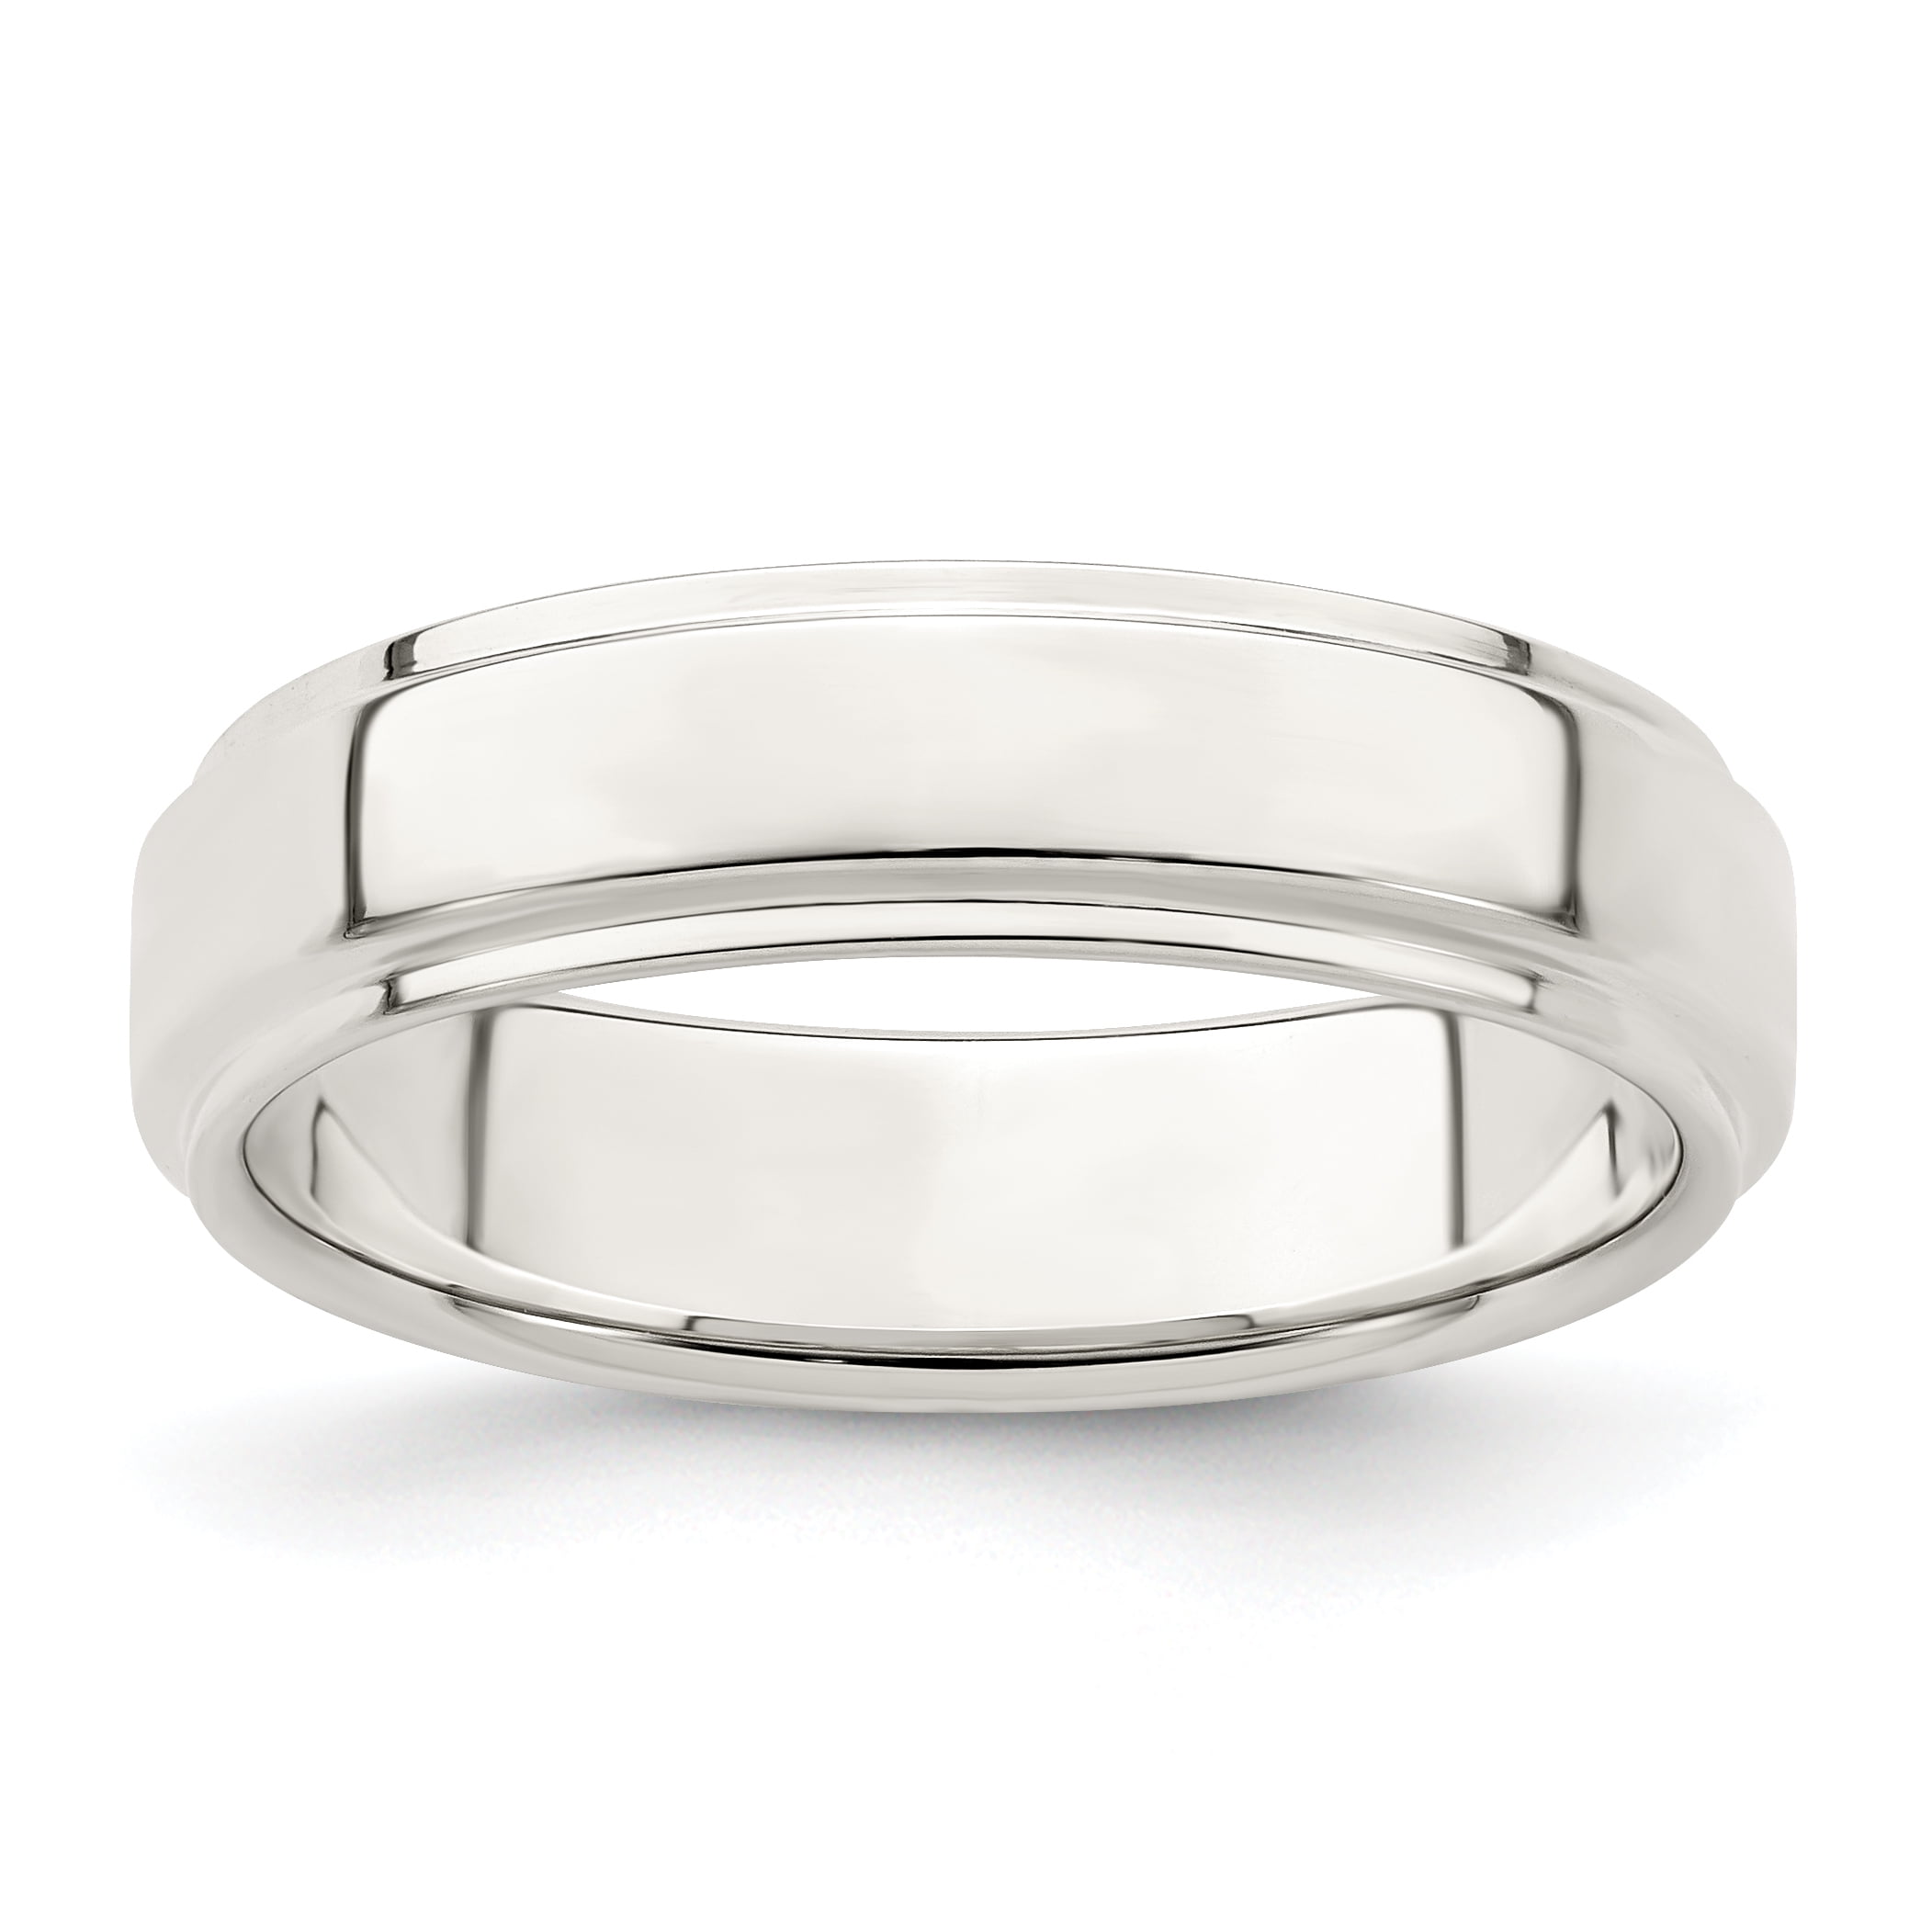 Fine Jewellery New Solid 925 Sterling Silver 5mm Flat Band Ring